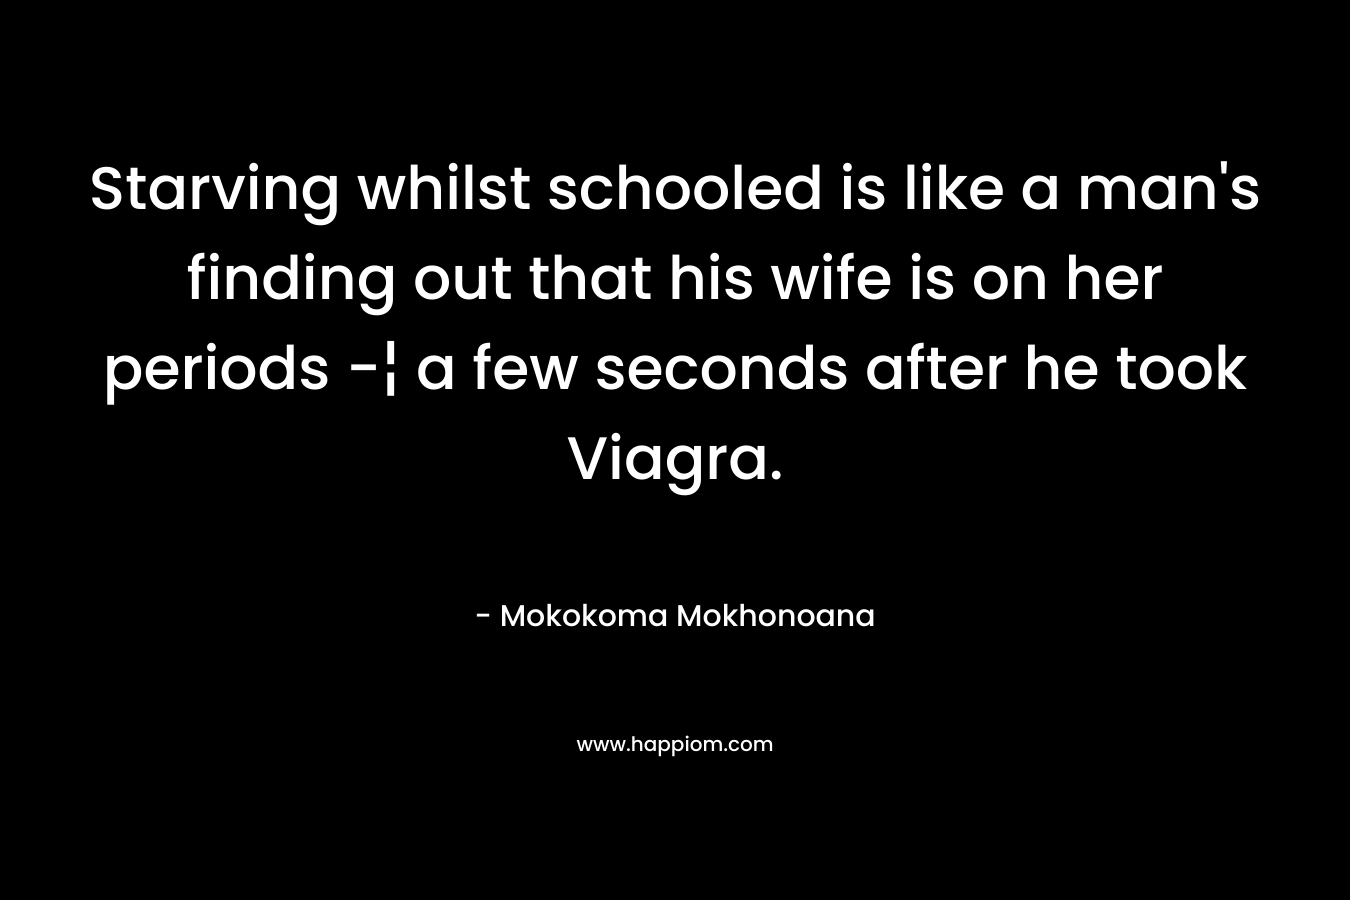 Starving whilst schooled is like a man’s finding out that his wife is on her periods -¦ a few seconds after he took Viagra. – Mokokoma Mokhonoana